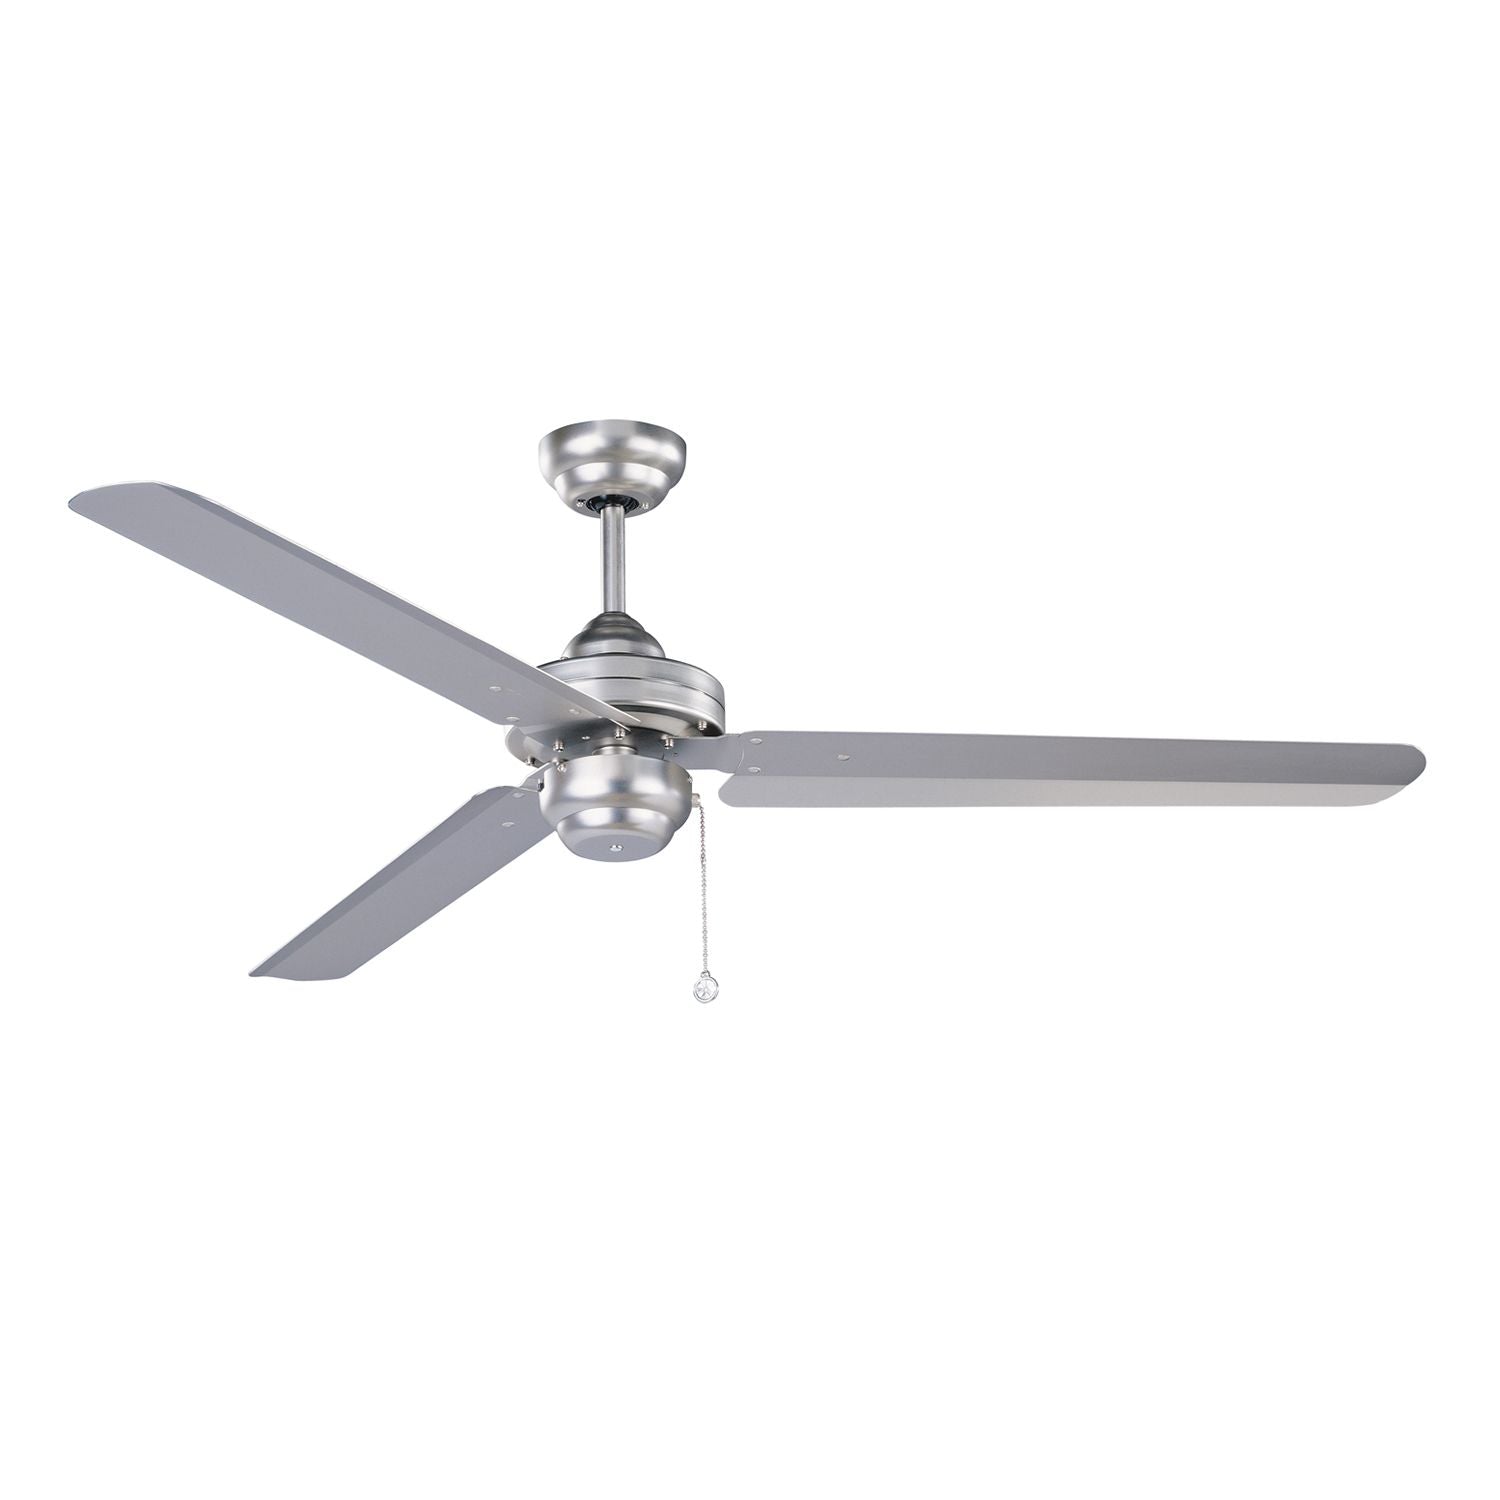 Studio 54 Ceiling Fan Brushed Steel with matching blades